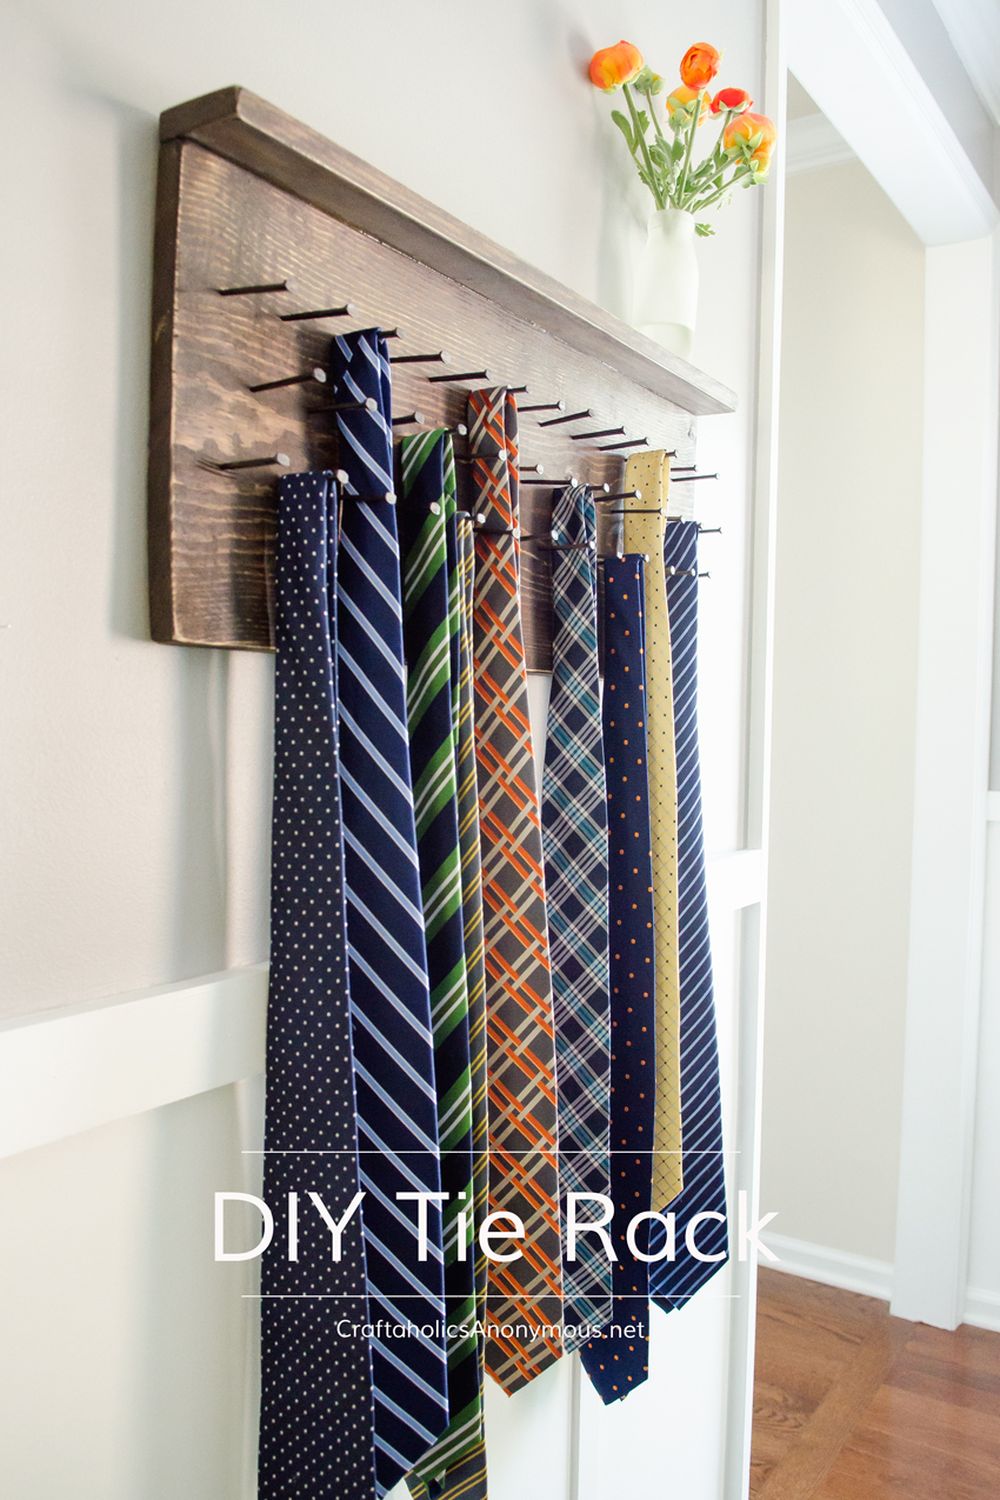 Diy tie rack cool christmas gifts for dad